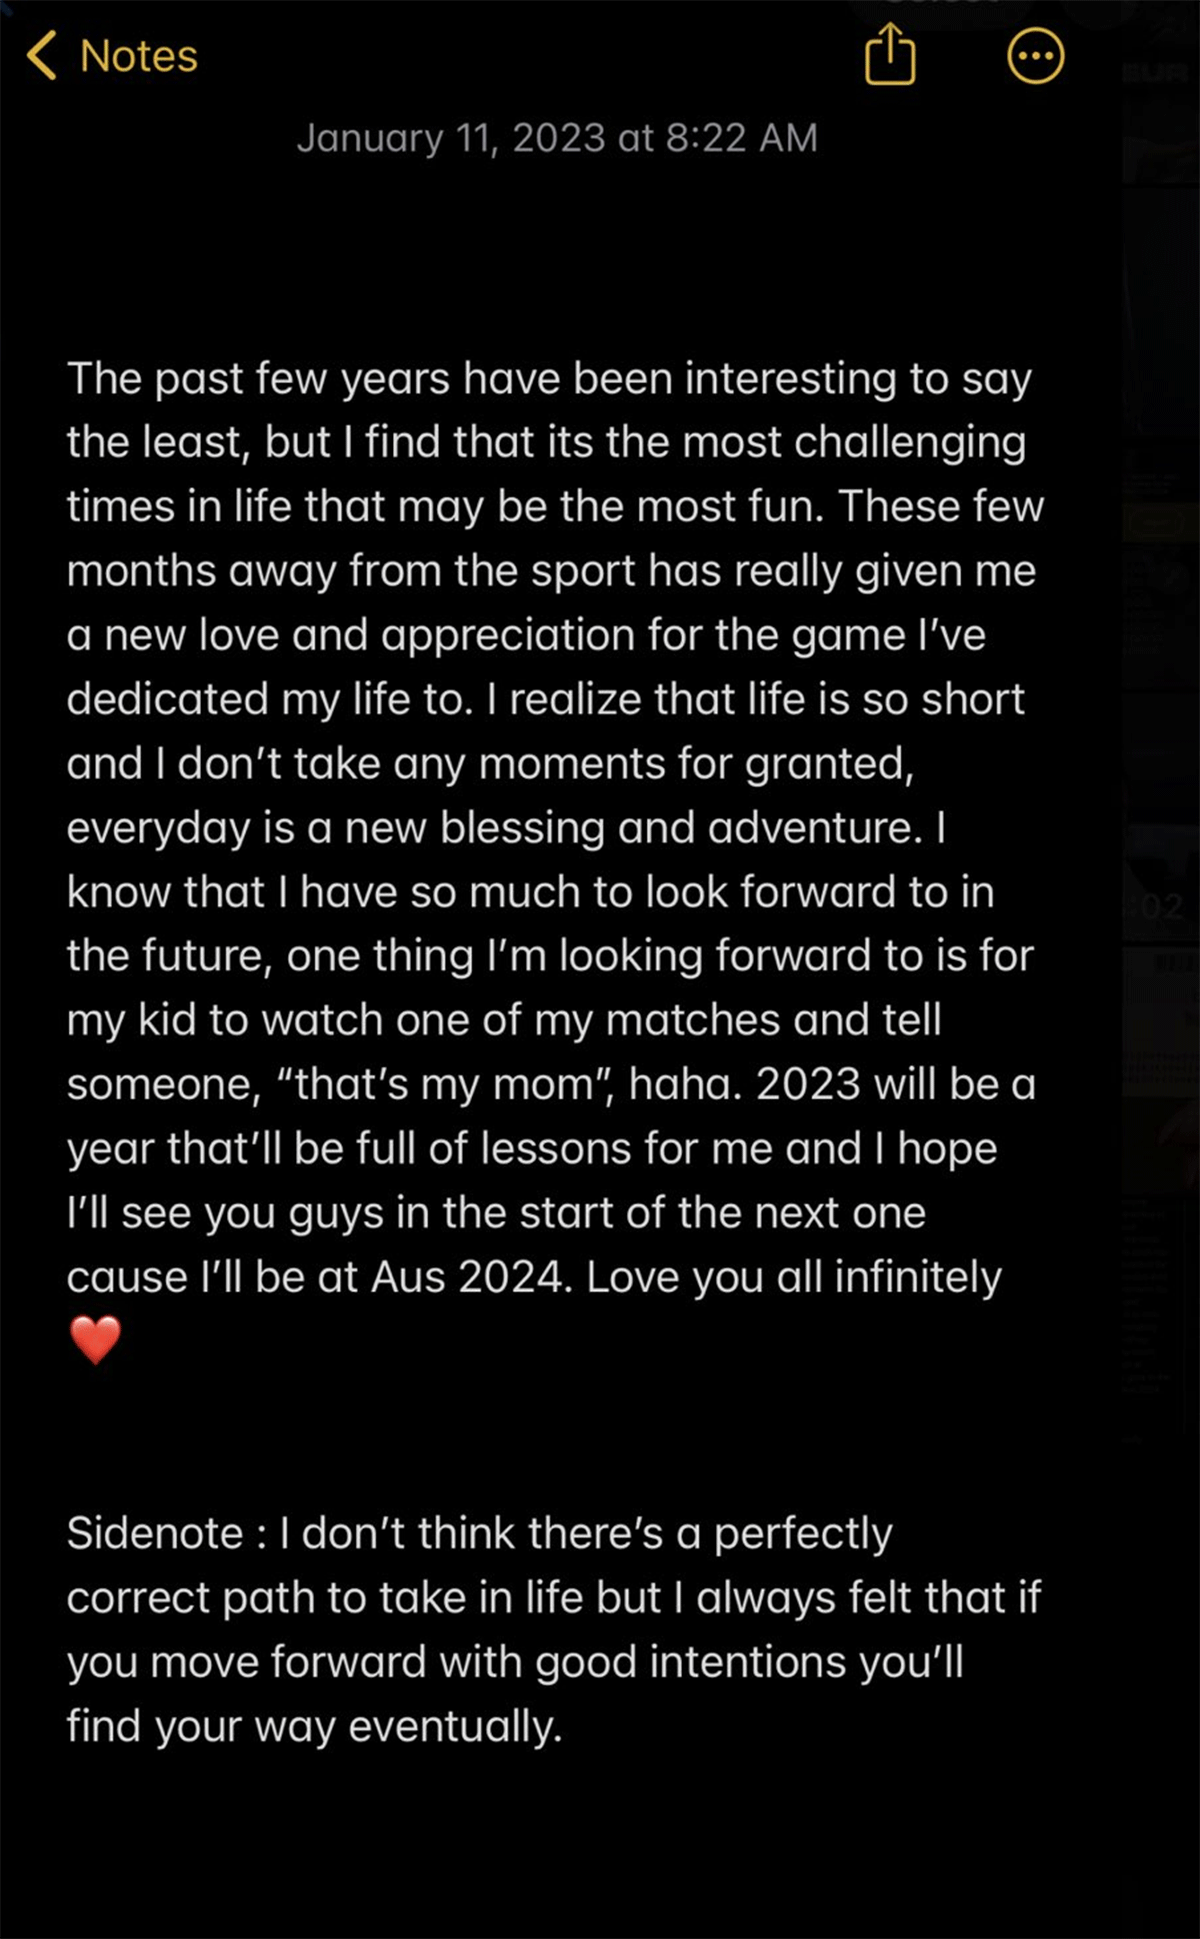 A note from Naomi Osaka announcing her pregnancy